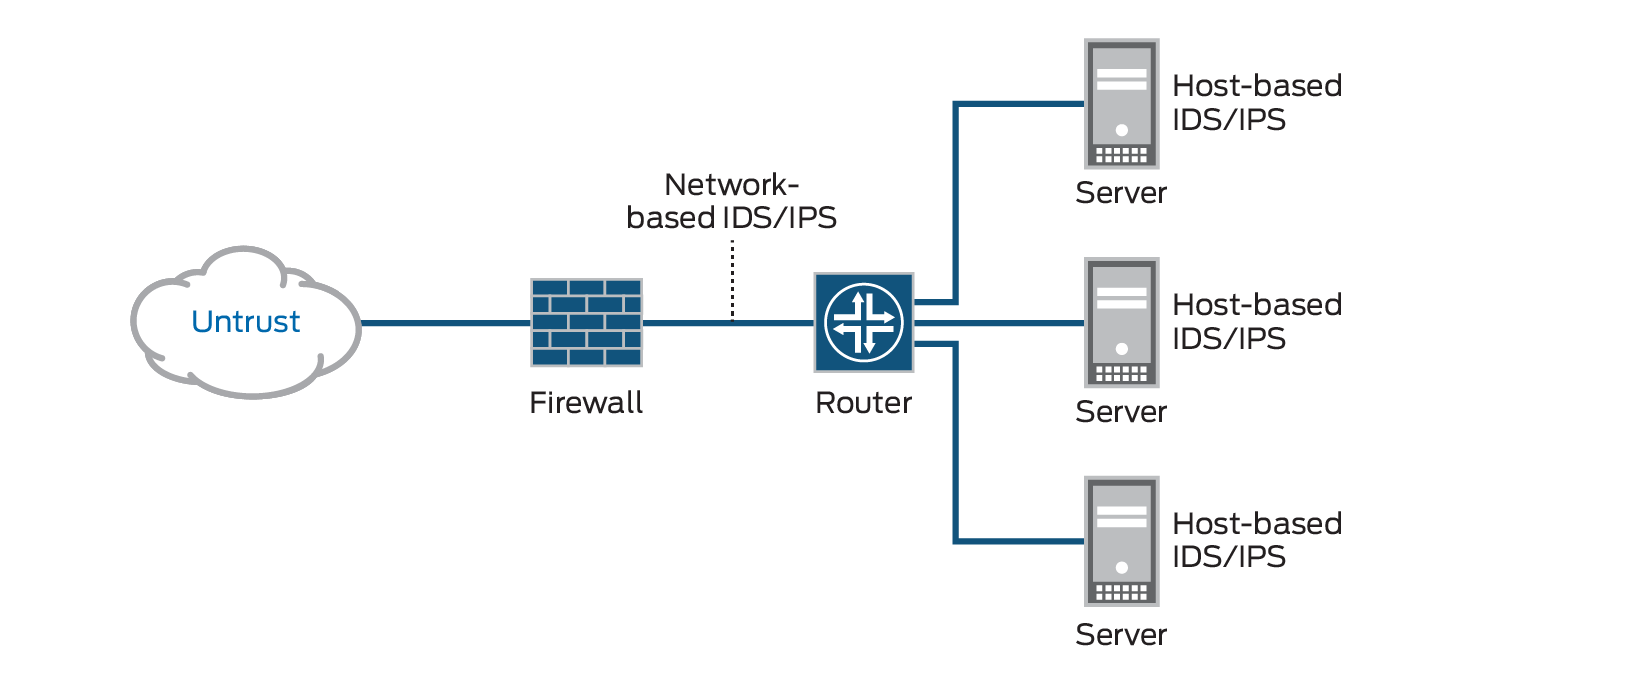 Ibm security network intrusion prevention system (ips) products